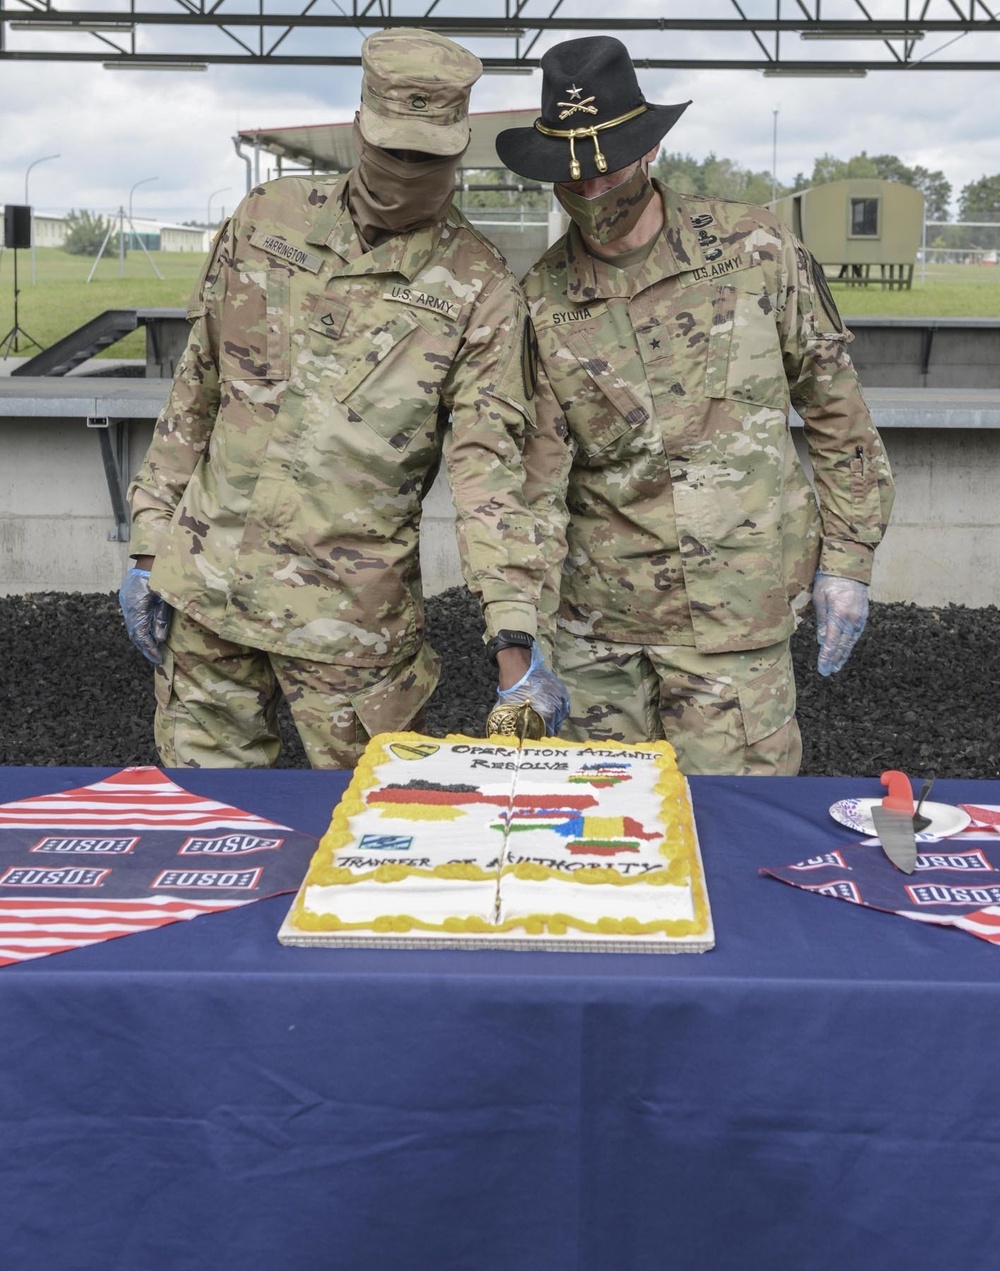 2-1CD transfers authority to 2-3ID during official ceremony